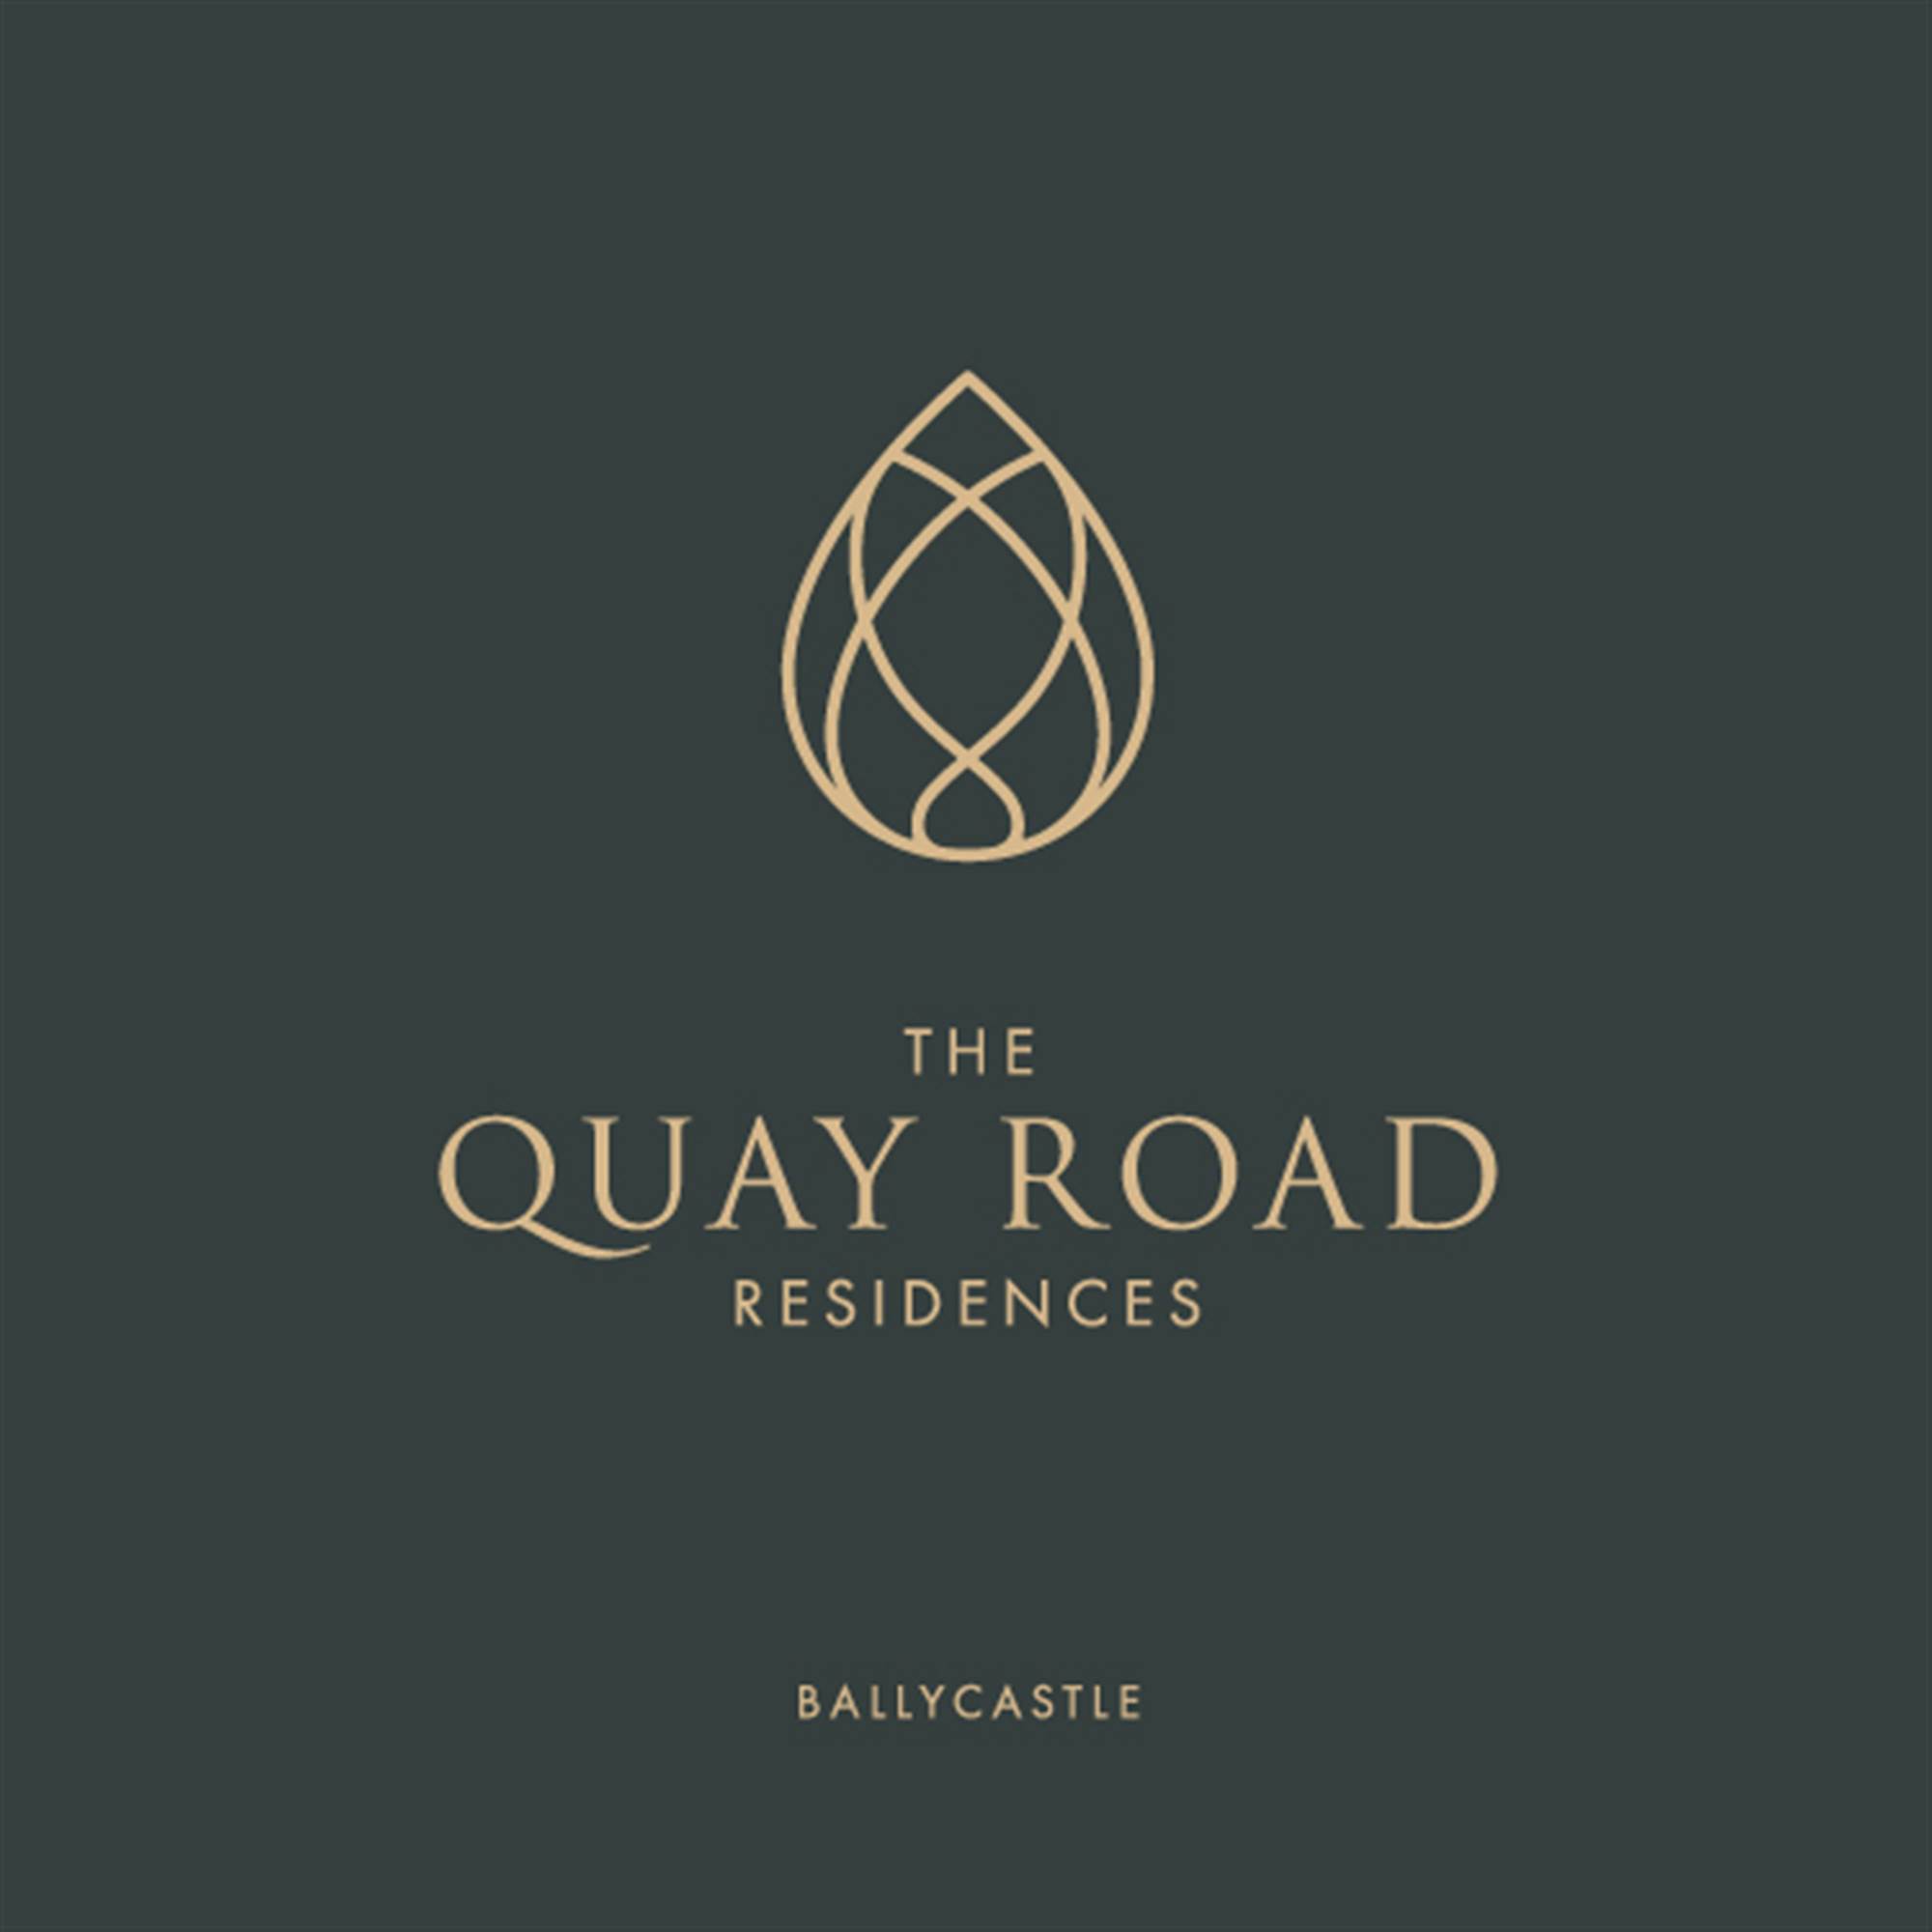 The Quay Road Residences